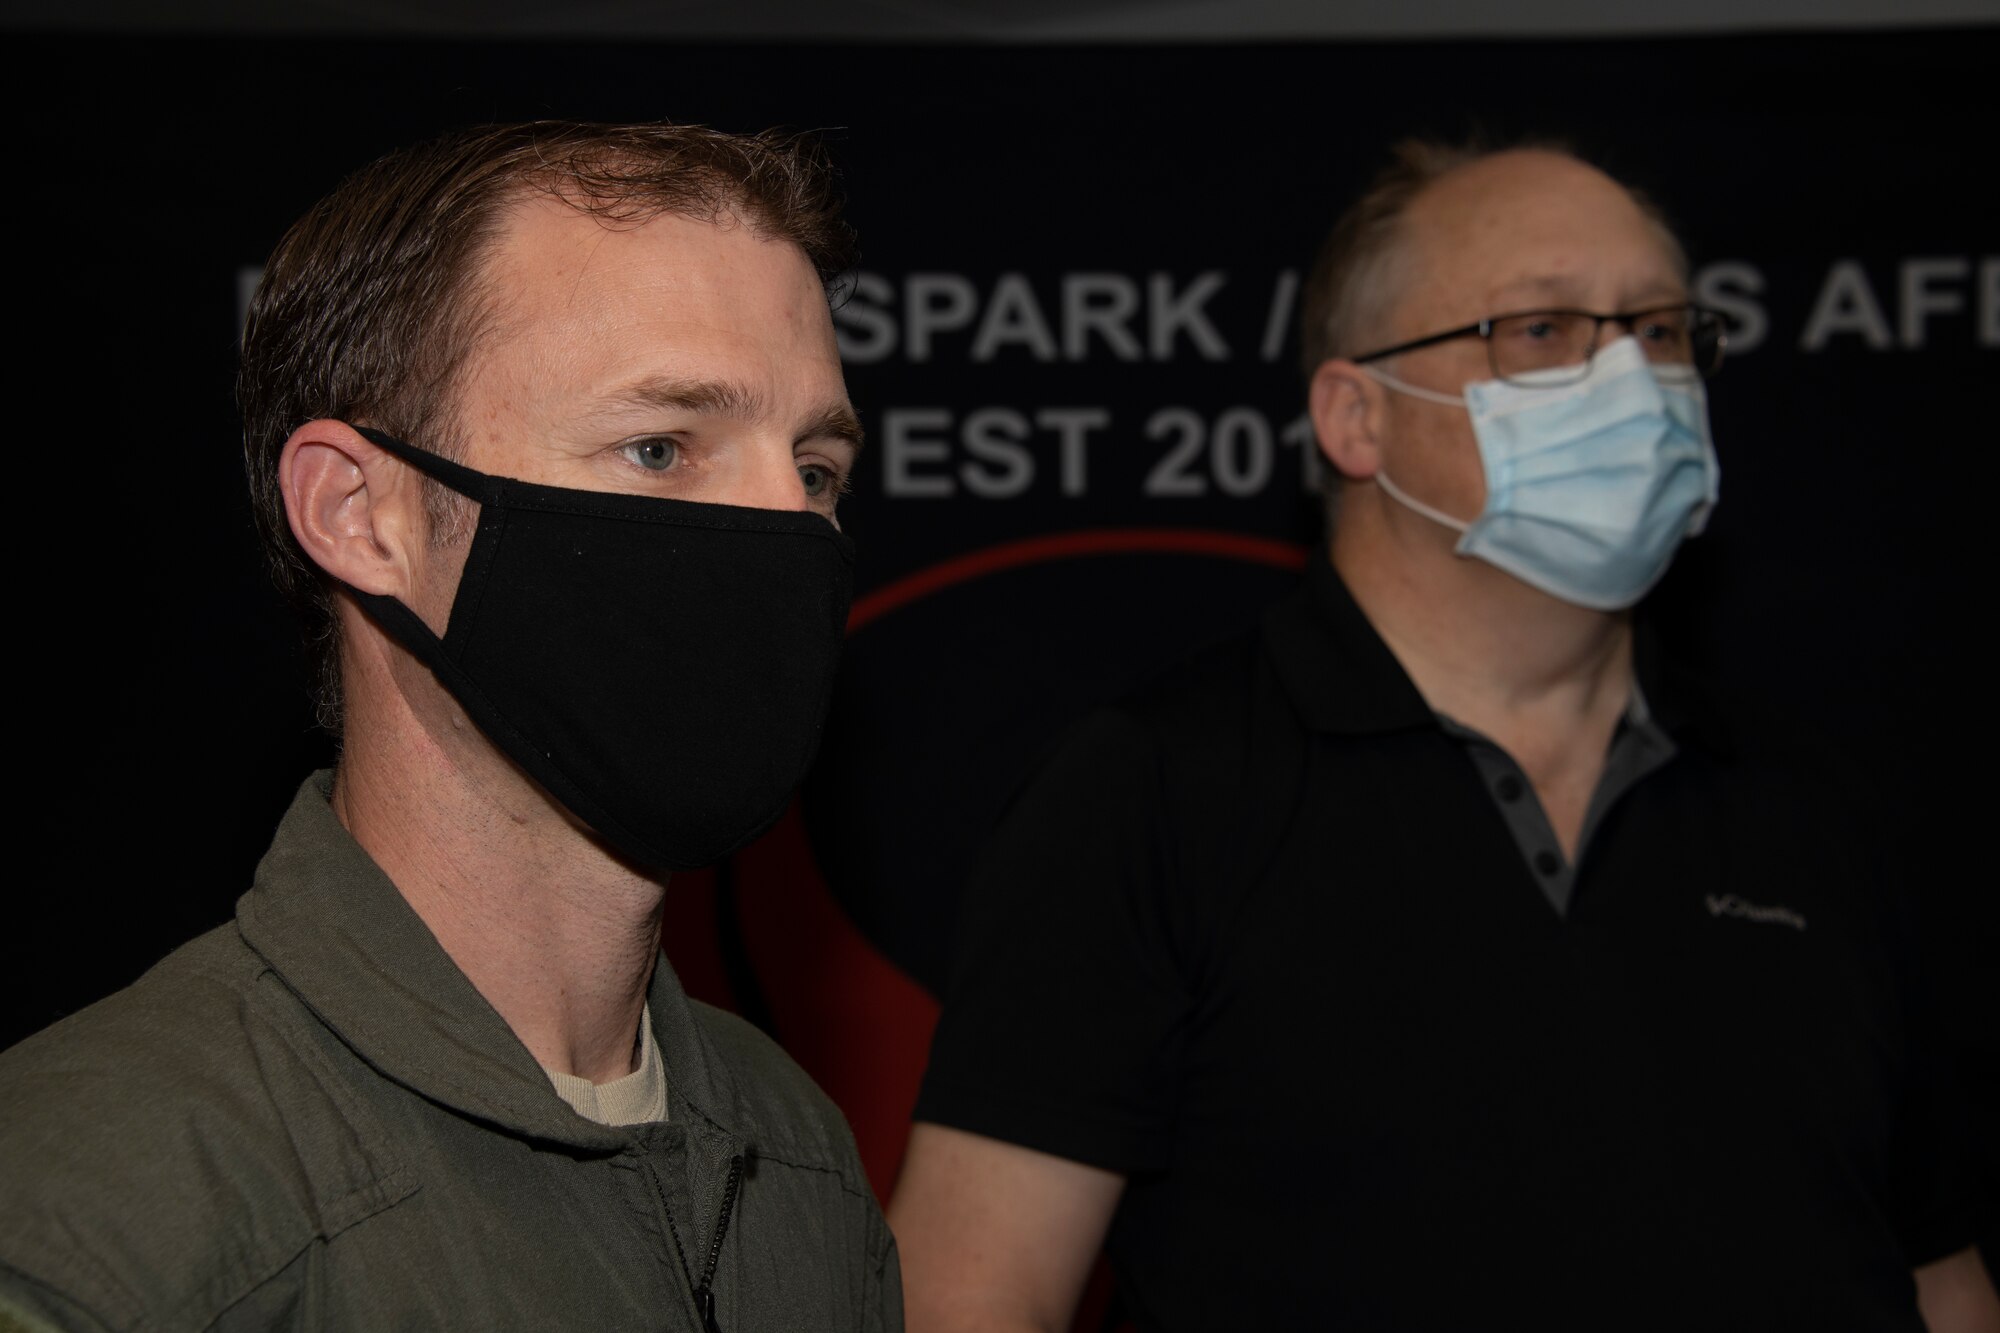 U.S. Air Force Senior Master Sgt. Phil Edwards, left, 60th Air Mobility Wing Phoenix Spark innovation cell superintendent, and John Dickerson, 60th AMW innovation officer, wear masks as they listen to a presentation May 20, 2020, during a commercial solutions offering event at Travis Air Force Base, California. The event, which featured 40 participants from 20 organizations, provided companies an opportunity to present innovative solutions to enhance the mission at Travis AFB. (U.S. Air Force photo by Tech. Sgt. James Hodgman)